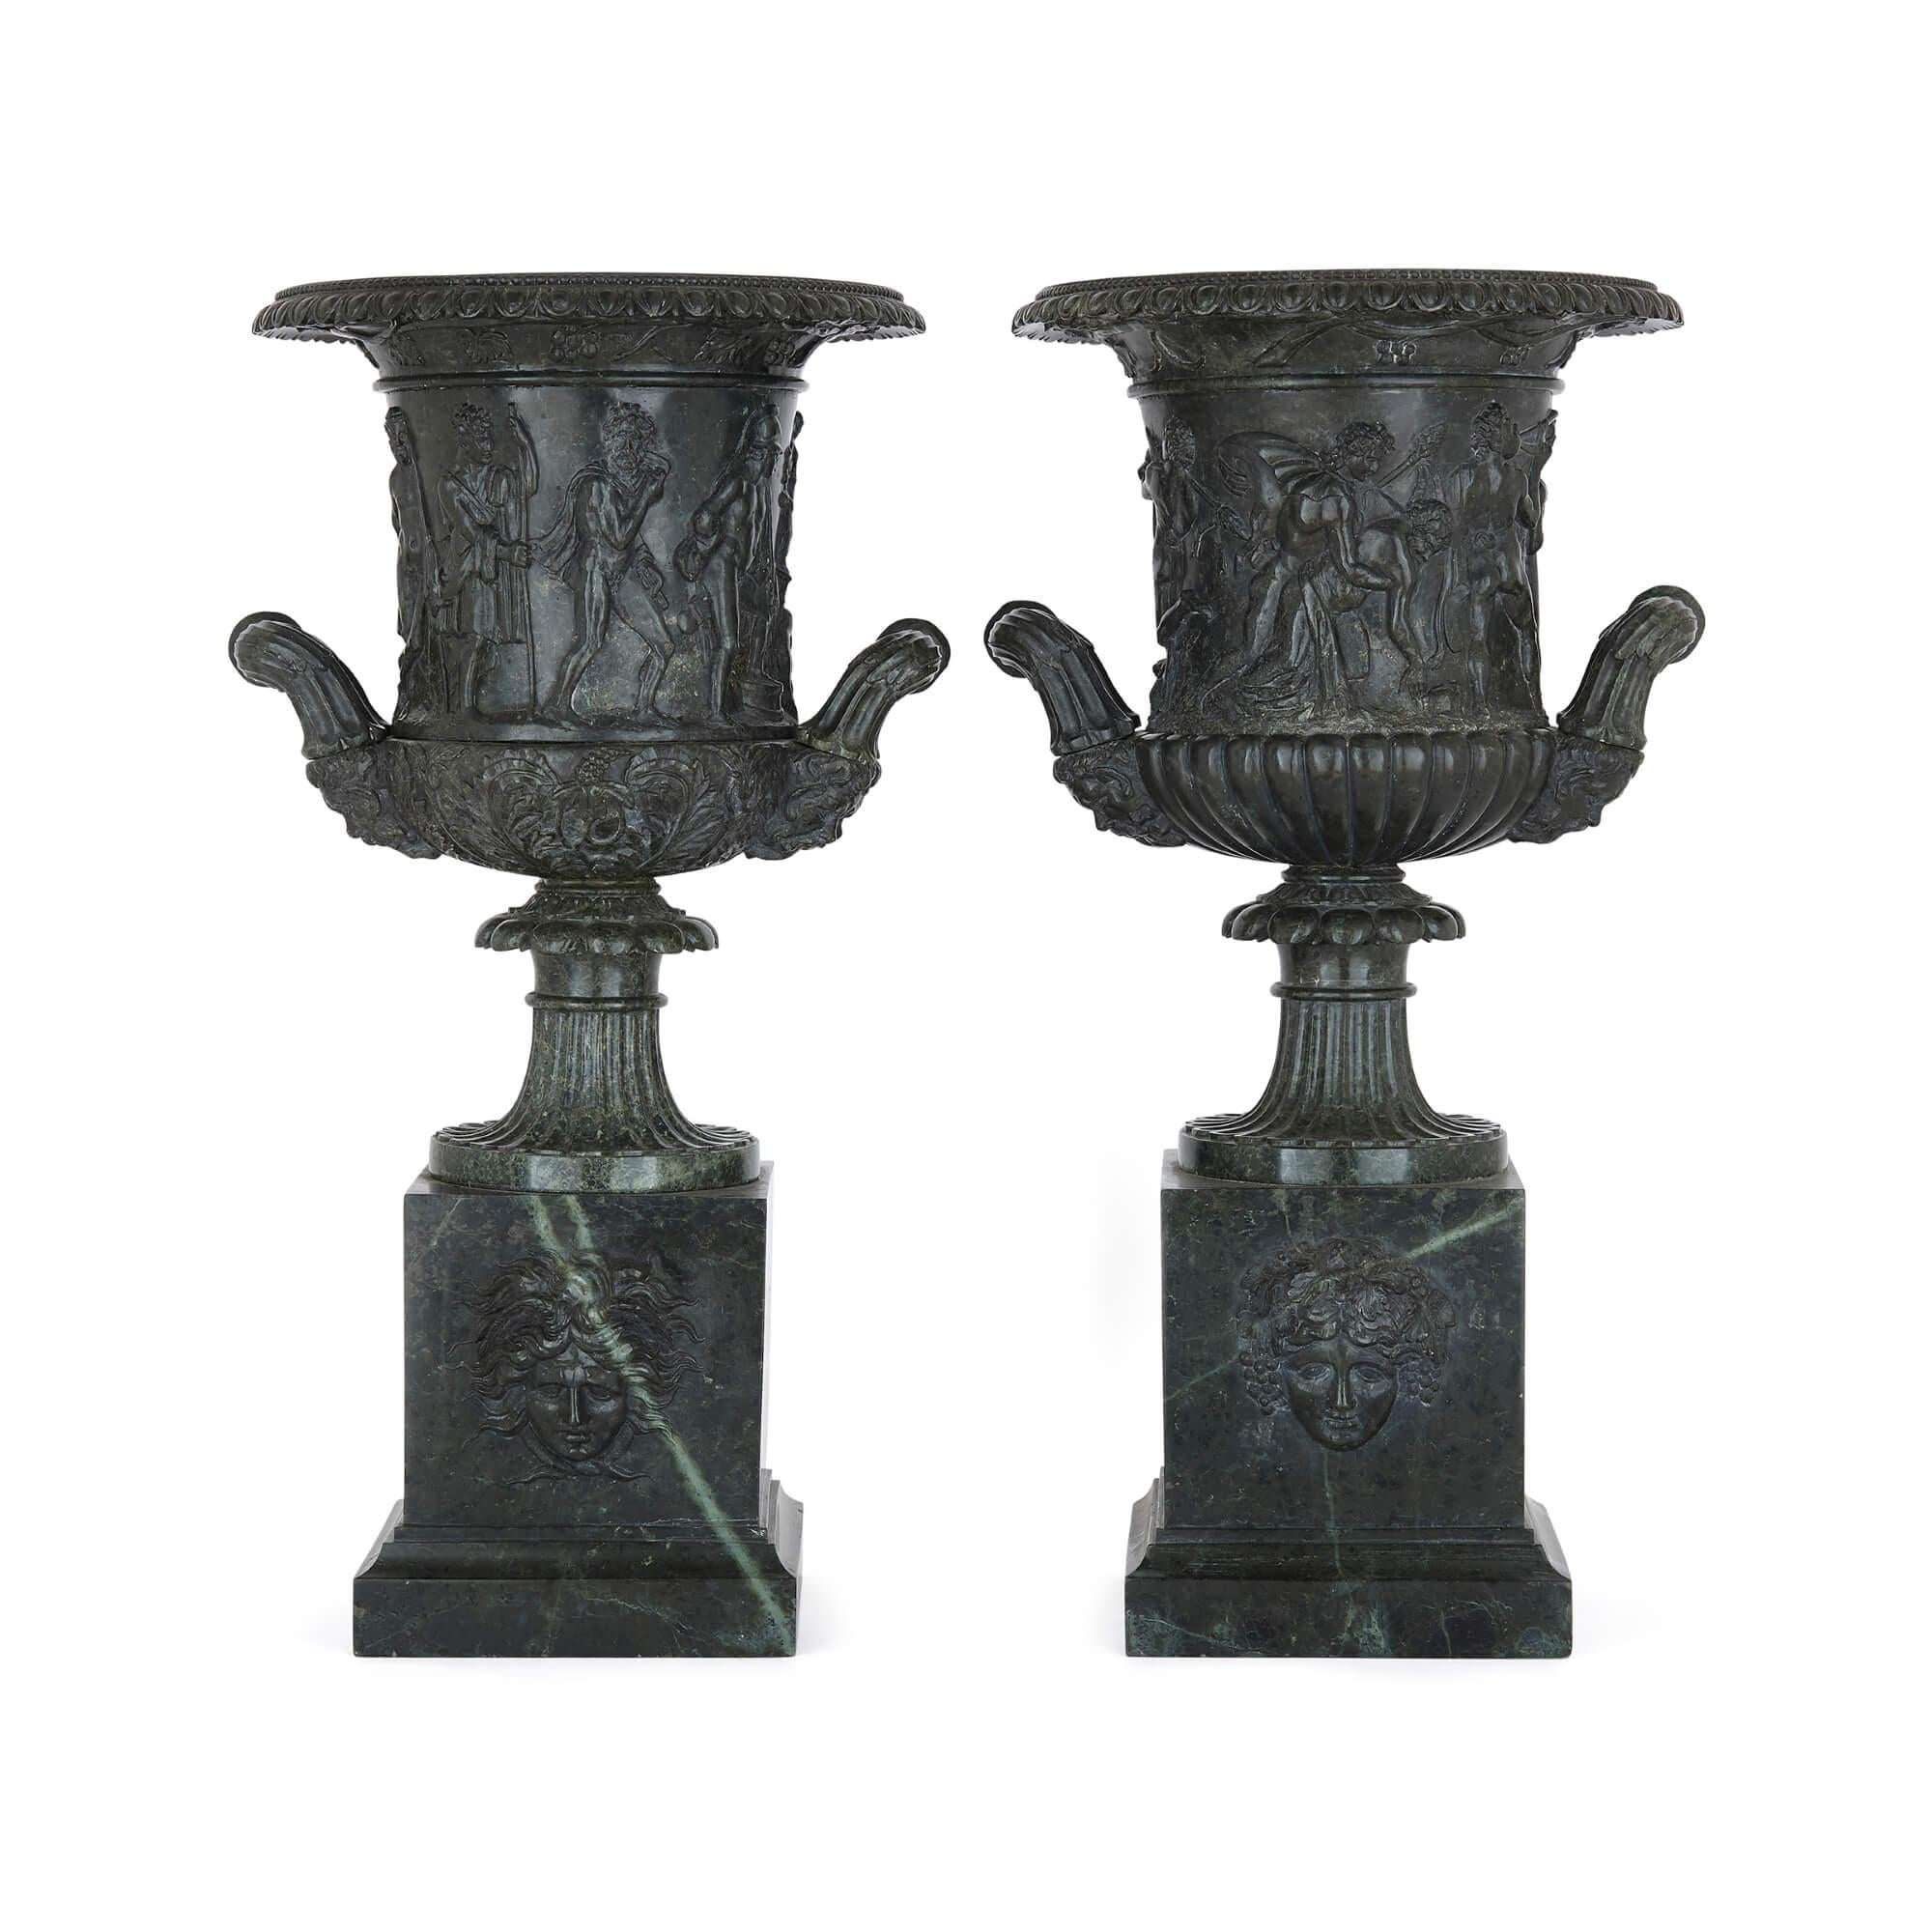 Pair of classical Italian grey marble vases after the famous Medici vase
Italian, 19th Century
Measures: Height 51cm, width 26cm, depth 25cm

These exceptional vases are carved from dark greenish marble in a classical style. Each vase is